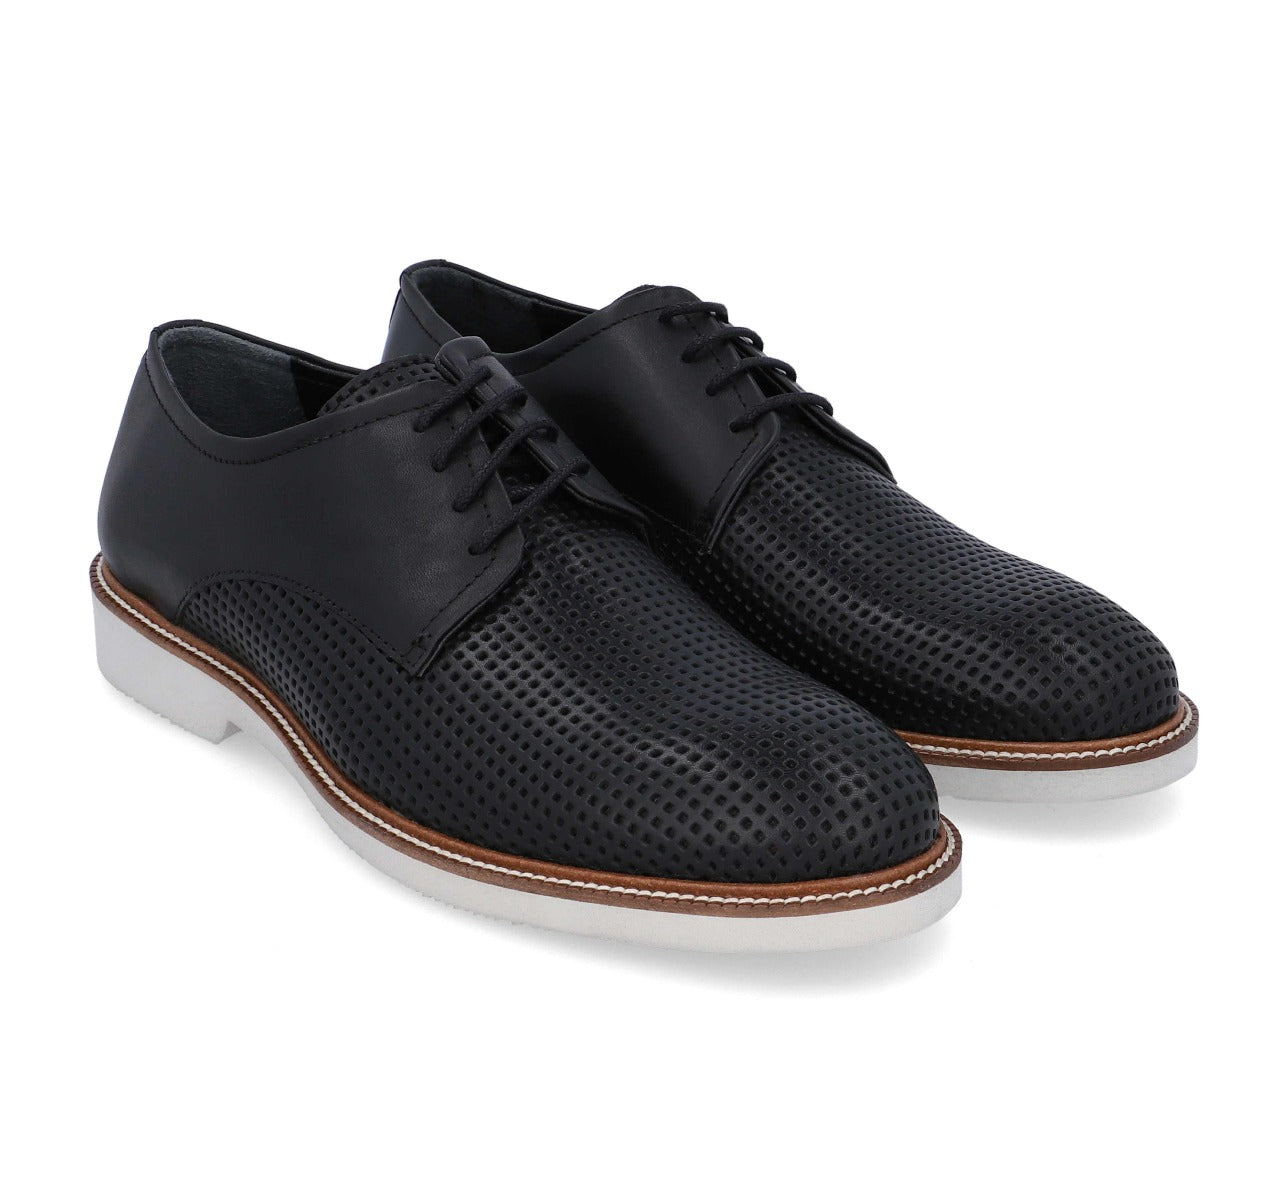 Barefoot Black Lace Up with White Sole For Men 229